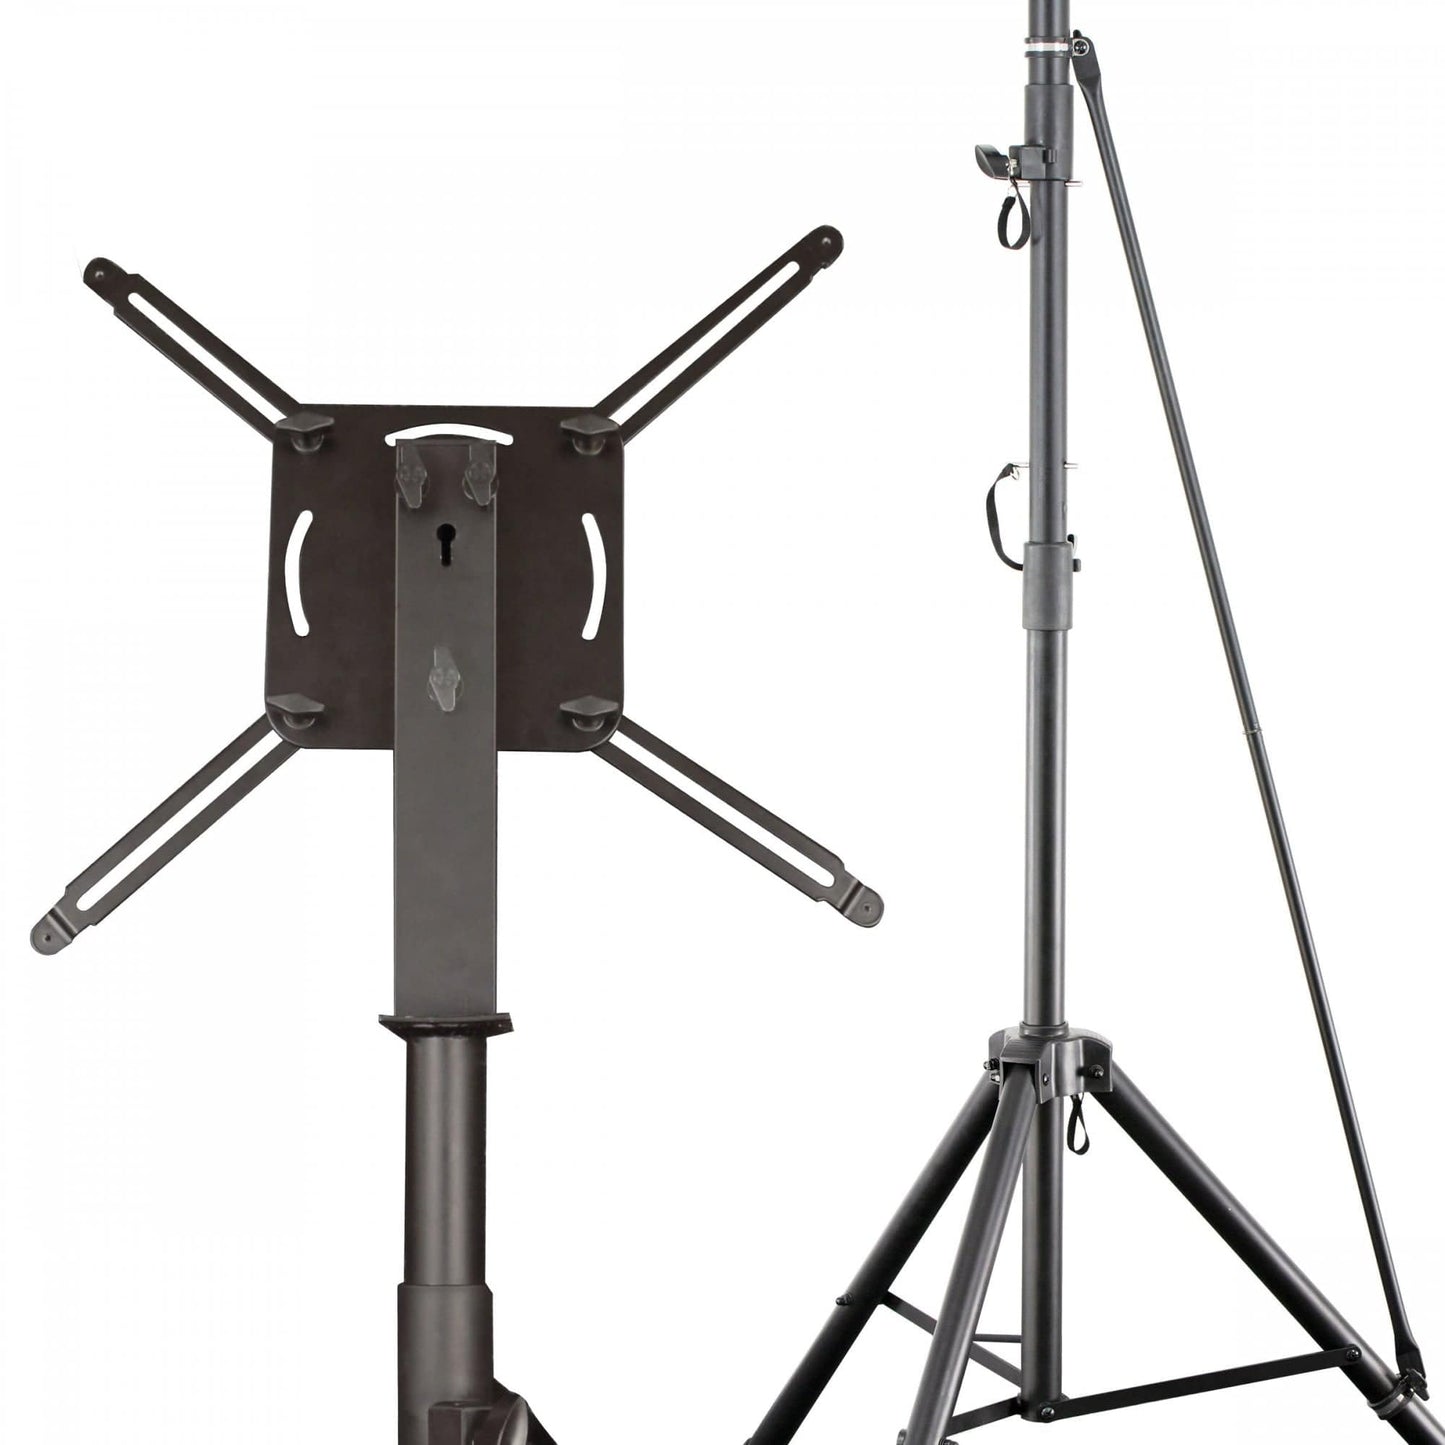 BULL'S Vibex H Mobile Dartstand - Mobile Travel Stand For Soft Tip Dartboards